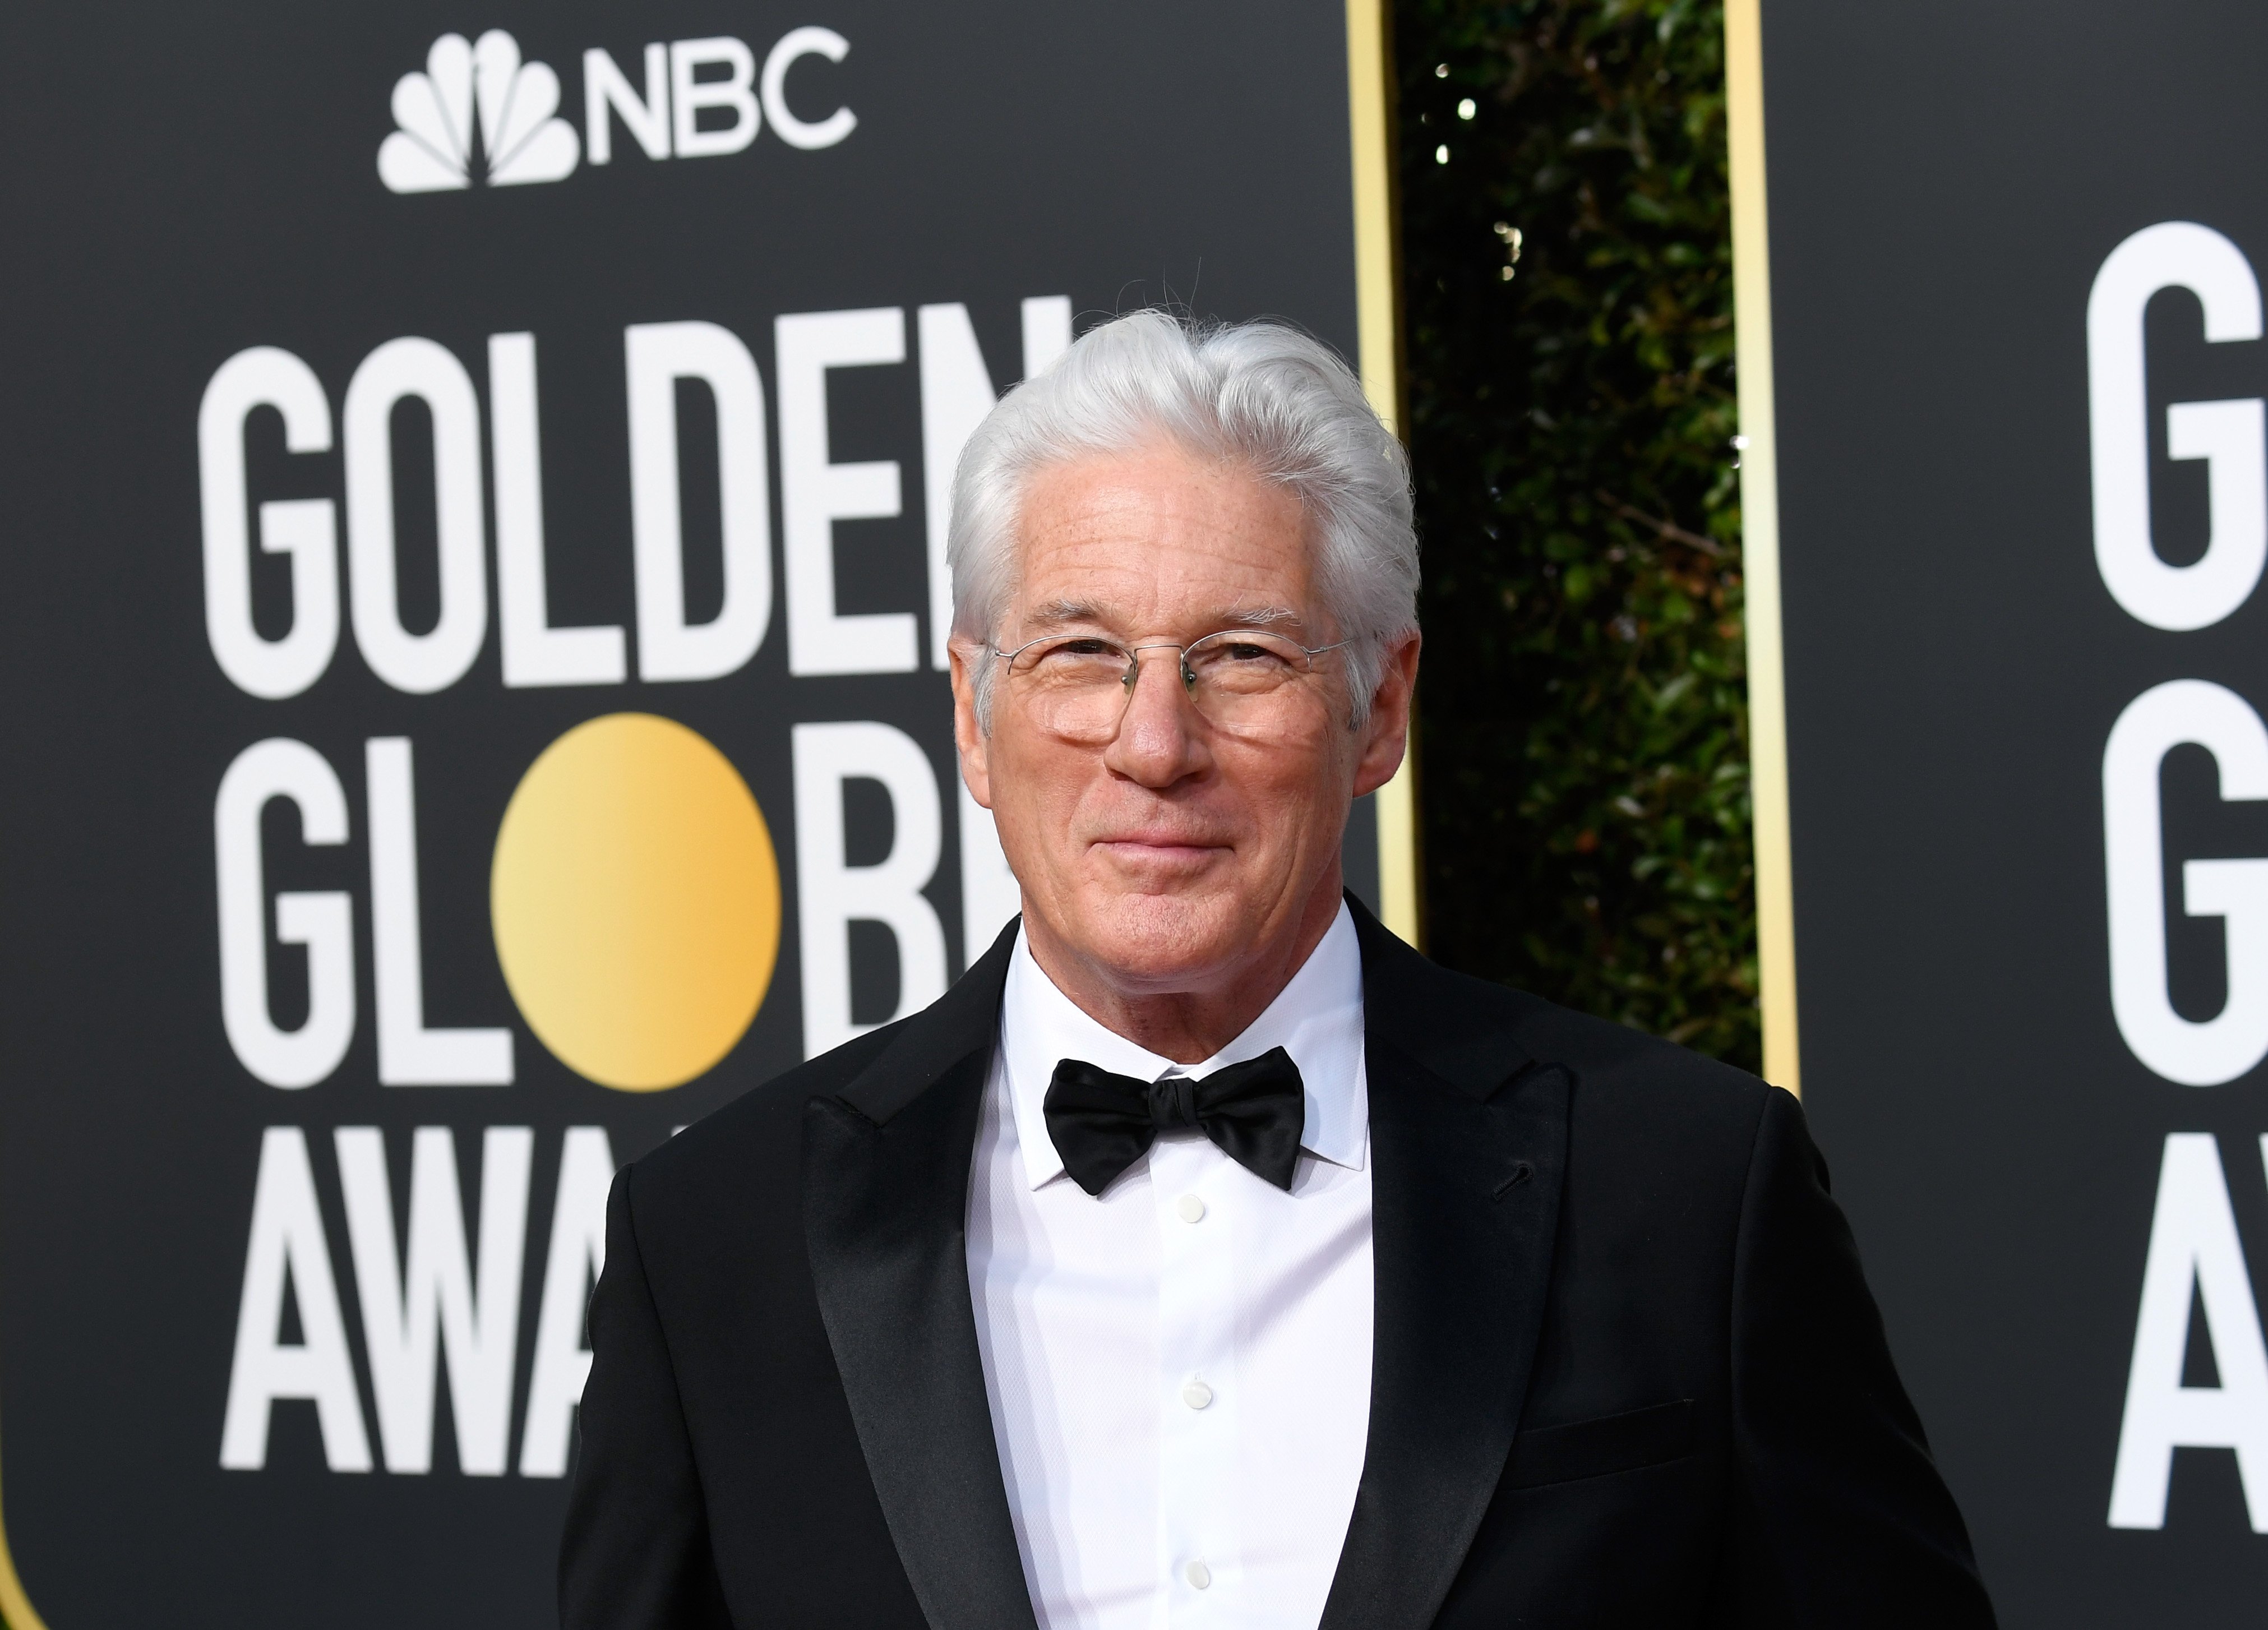 Richard Gere at the 76th Annual Golden Globe Awards on January 6, 2019 | Source: Getty Images